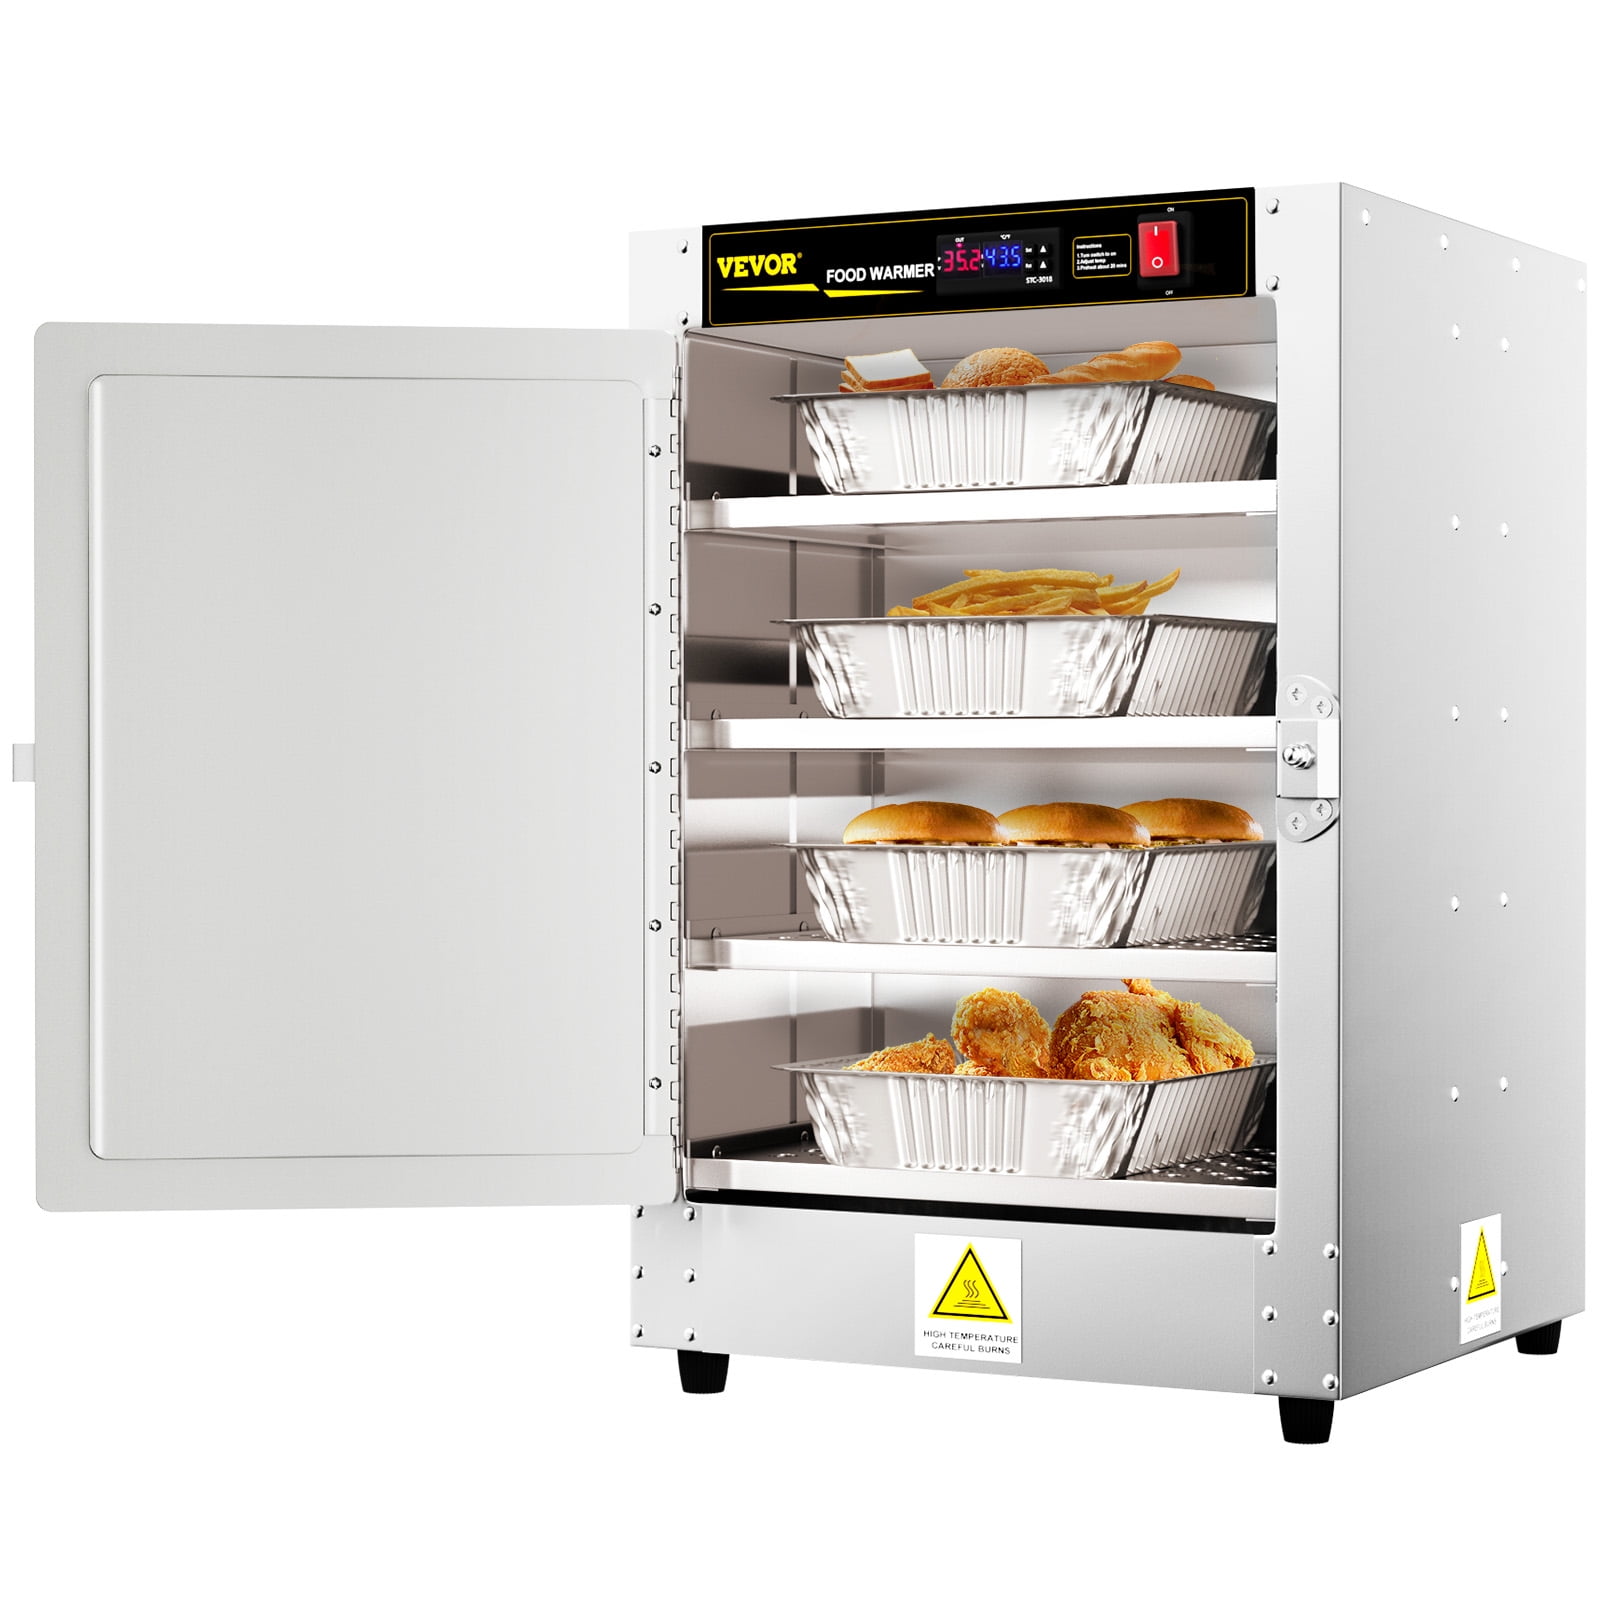 PYY Warming Cabinet 4 Tier Commercial Hot Box Food Warmer for Catering,  with Temperature Control and Water Pan,Stainless Steel Food Heater  Insulated Food Pan Carrier, for Pizza, Kitchen 120V 750W - Yahoo